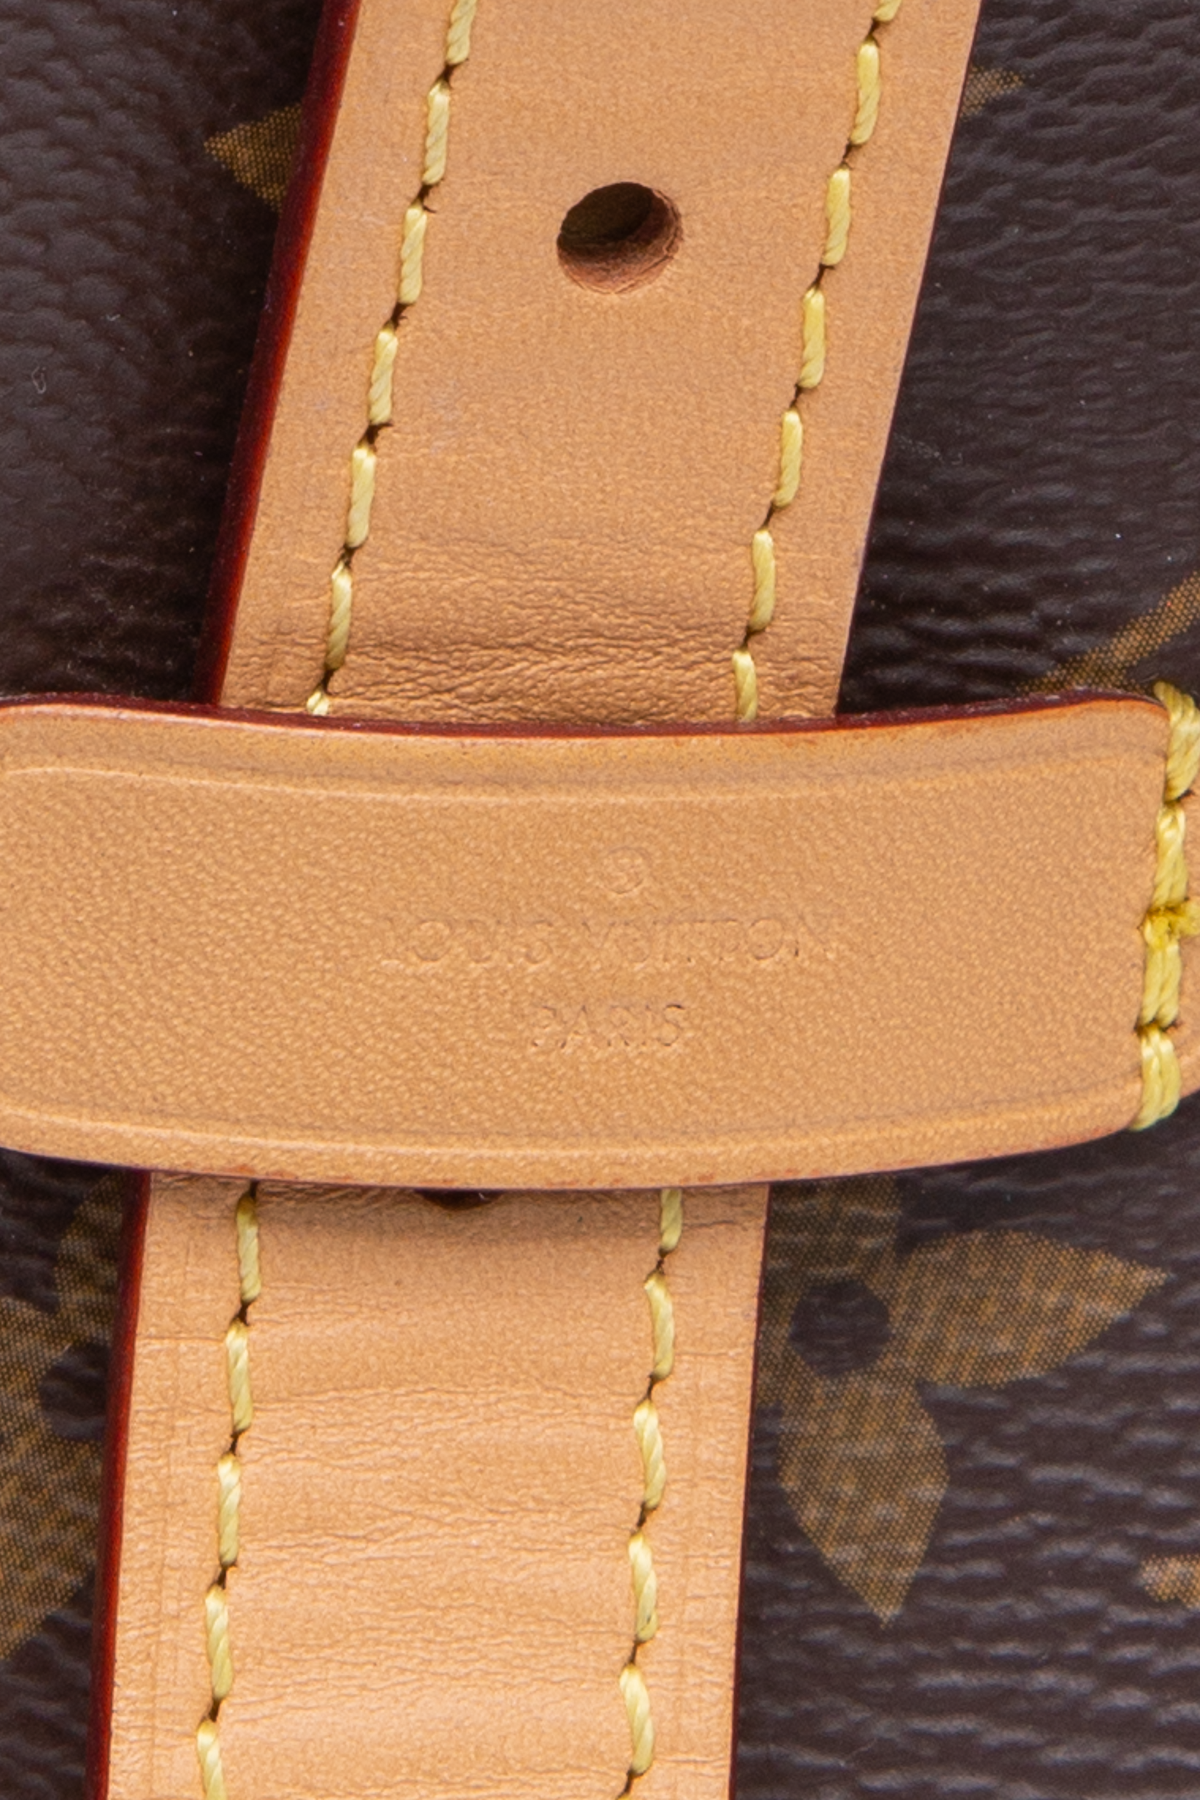 Louis Vuitton CarryAll PM Bag - Couture USA